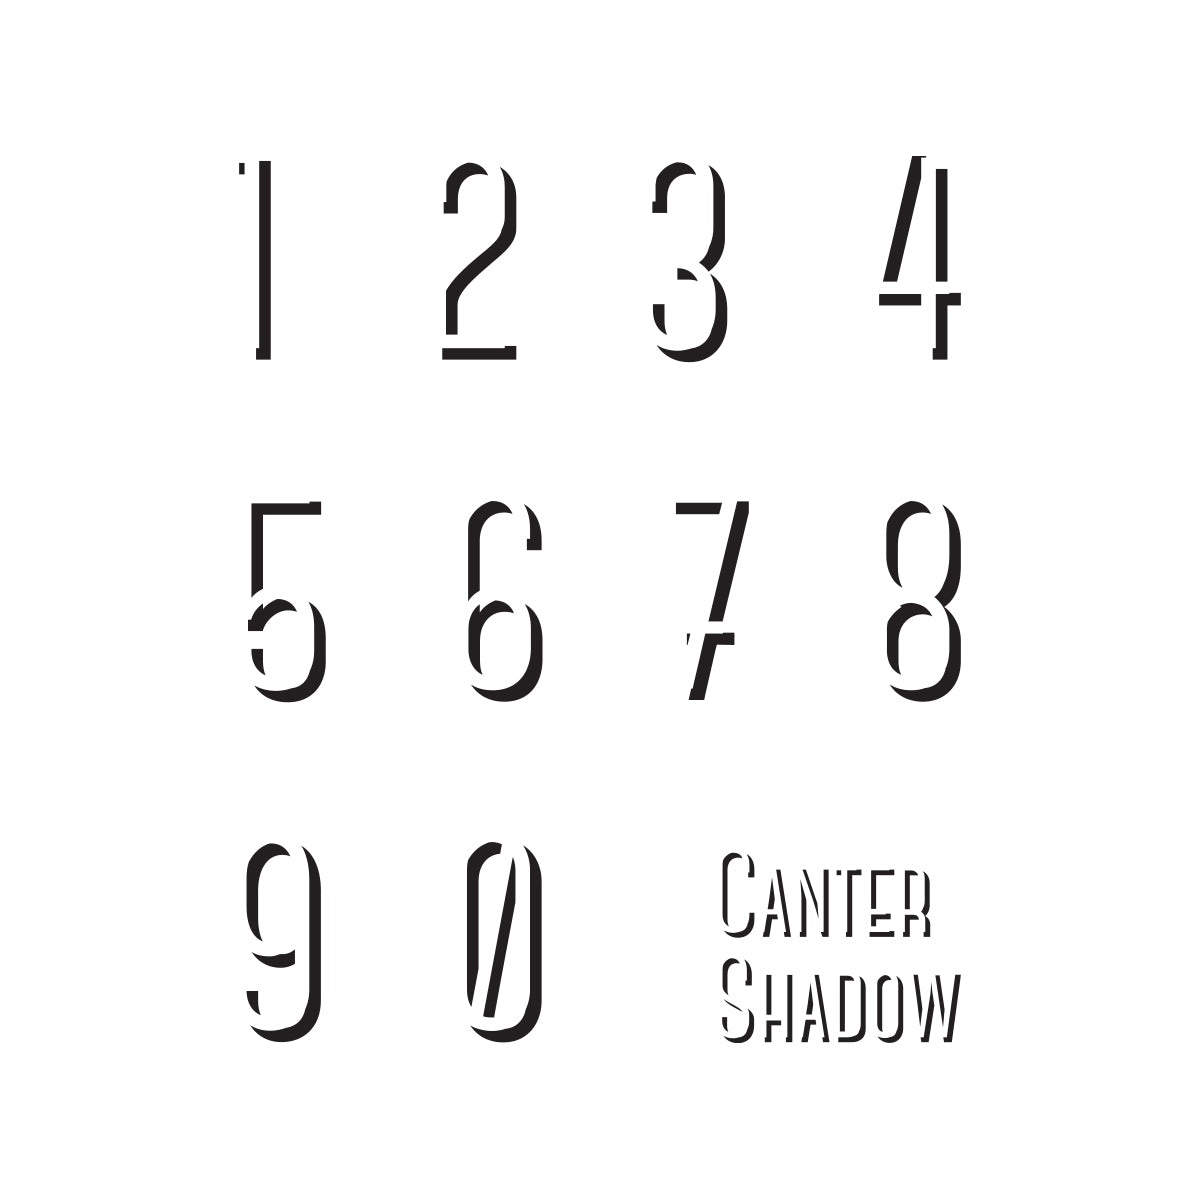 Canter Shadow Number in Oval.